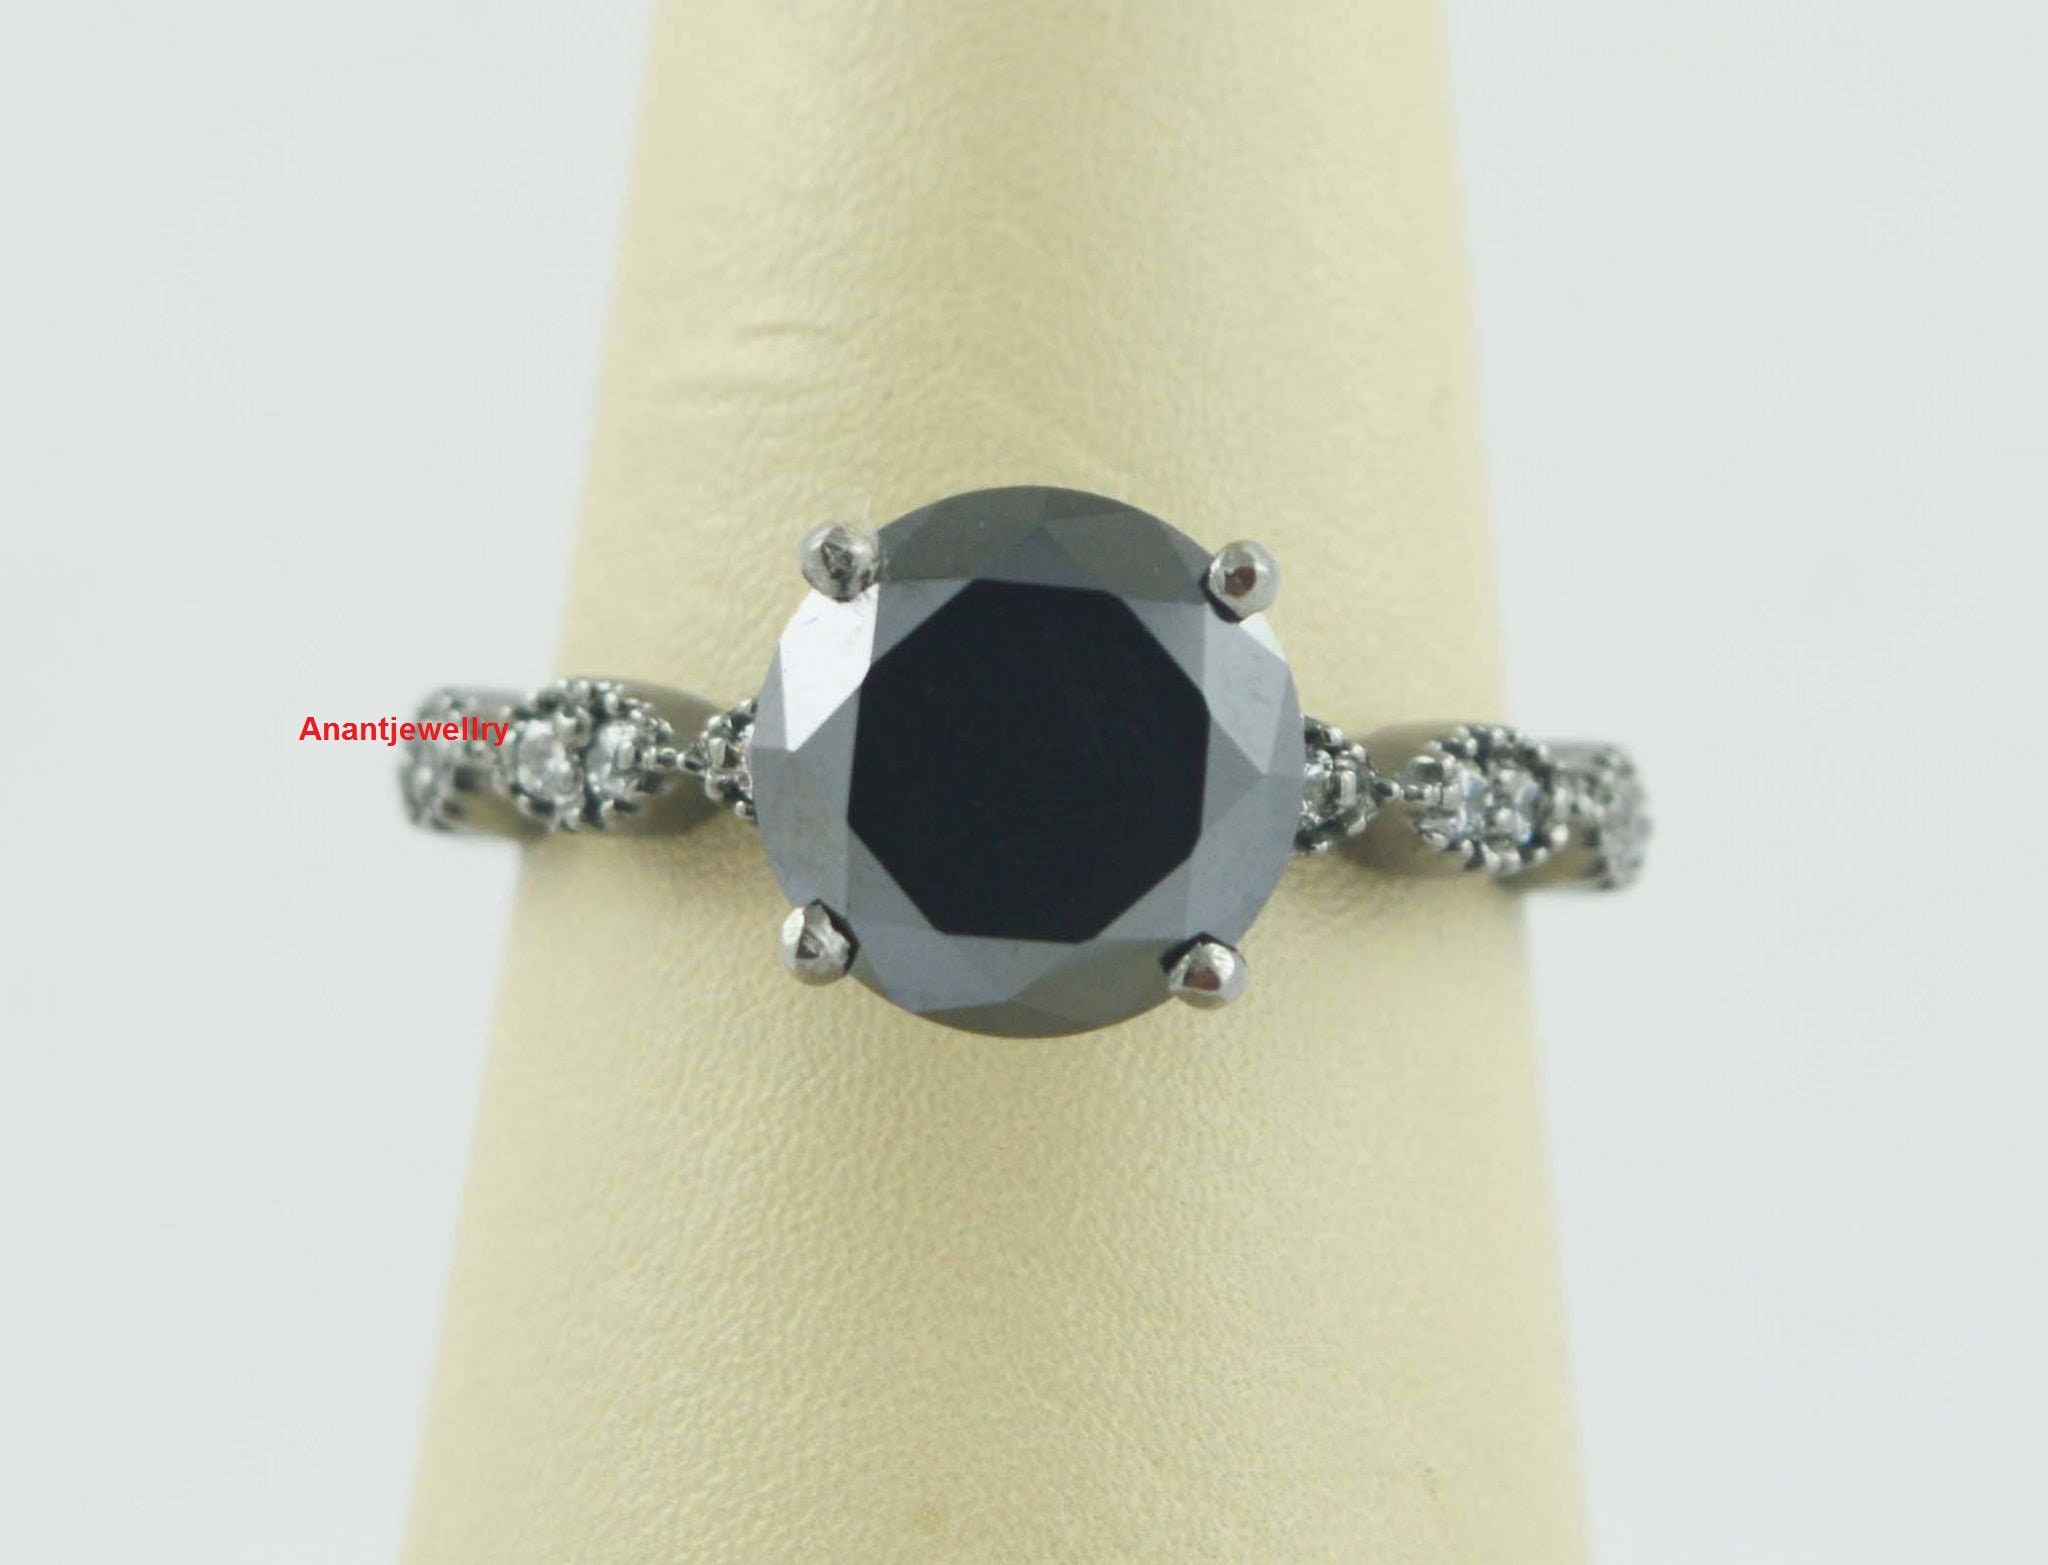 3.50Ct Certified Round Shape Black Diamond Ring In 925 silver Women's Jewelry,Wedding Band,Engagement Ring